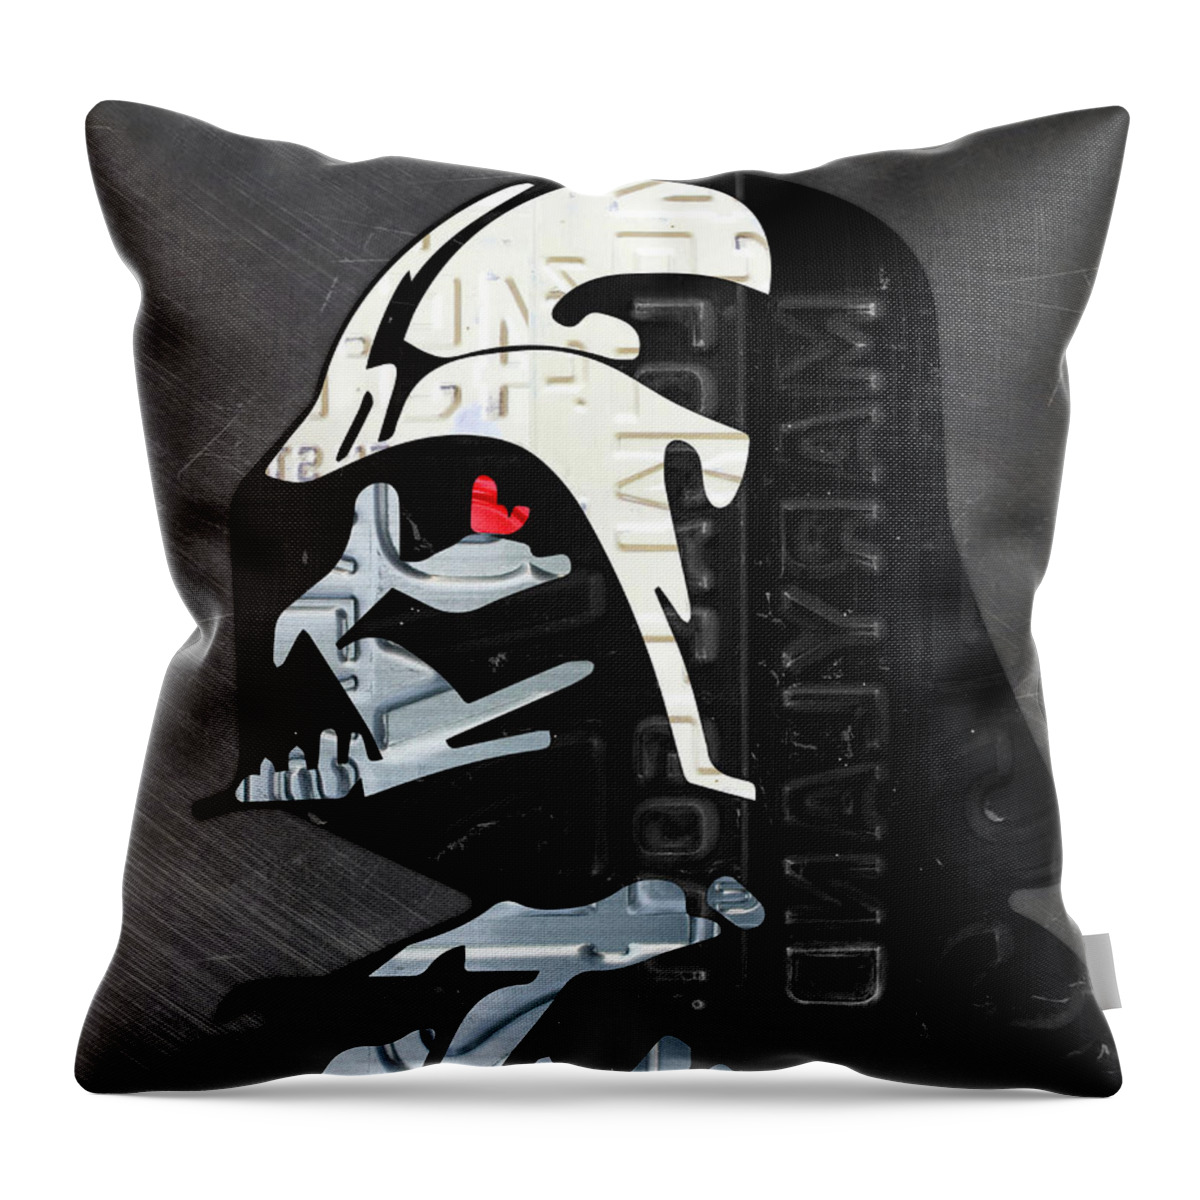 Darth Vader Throw Pillow featuring the mixed media Darth Vader Helmet Star Wars Portrait Recycled License Plate Art by Design Turnpike